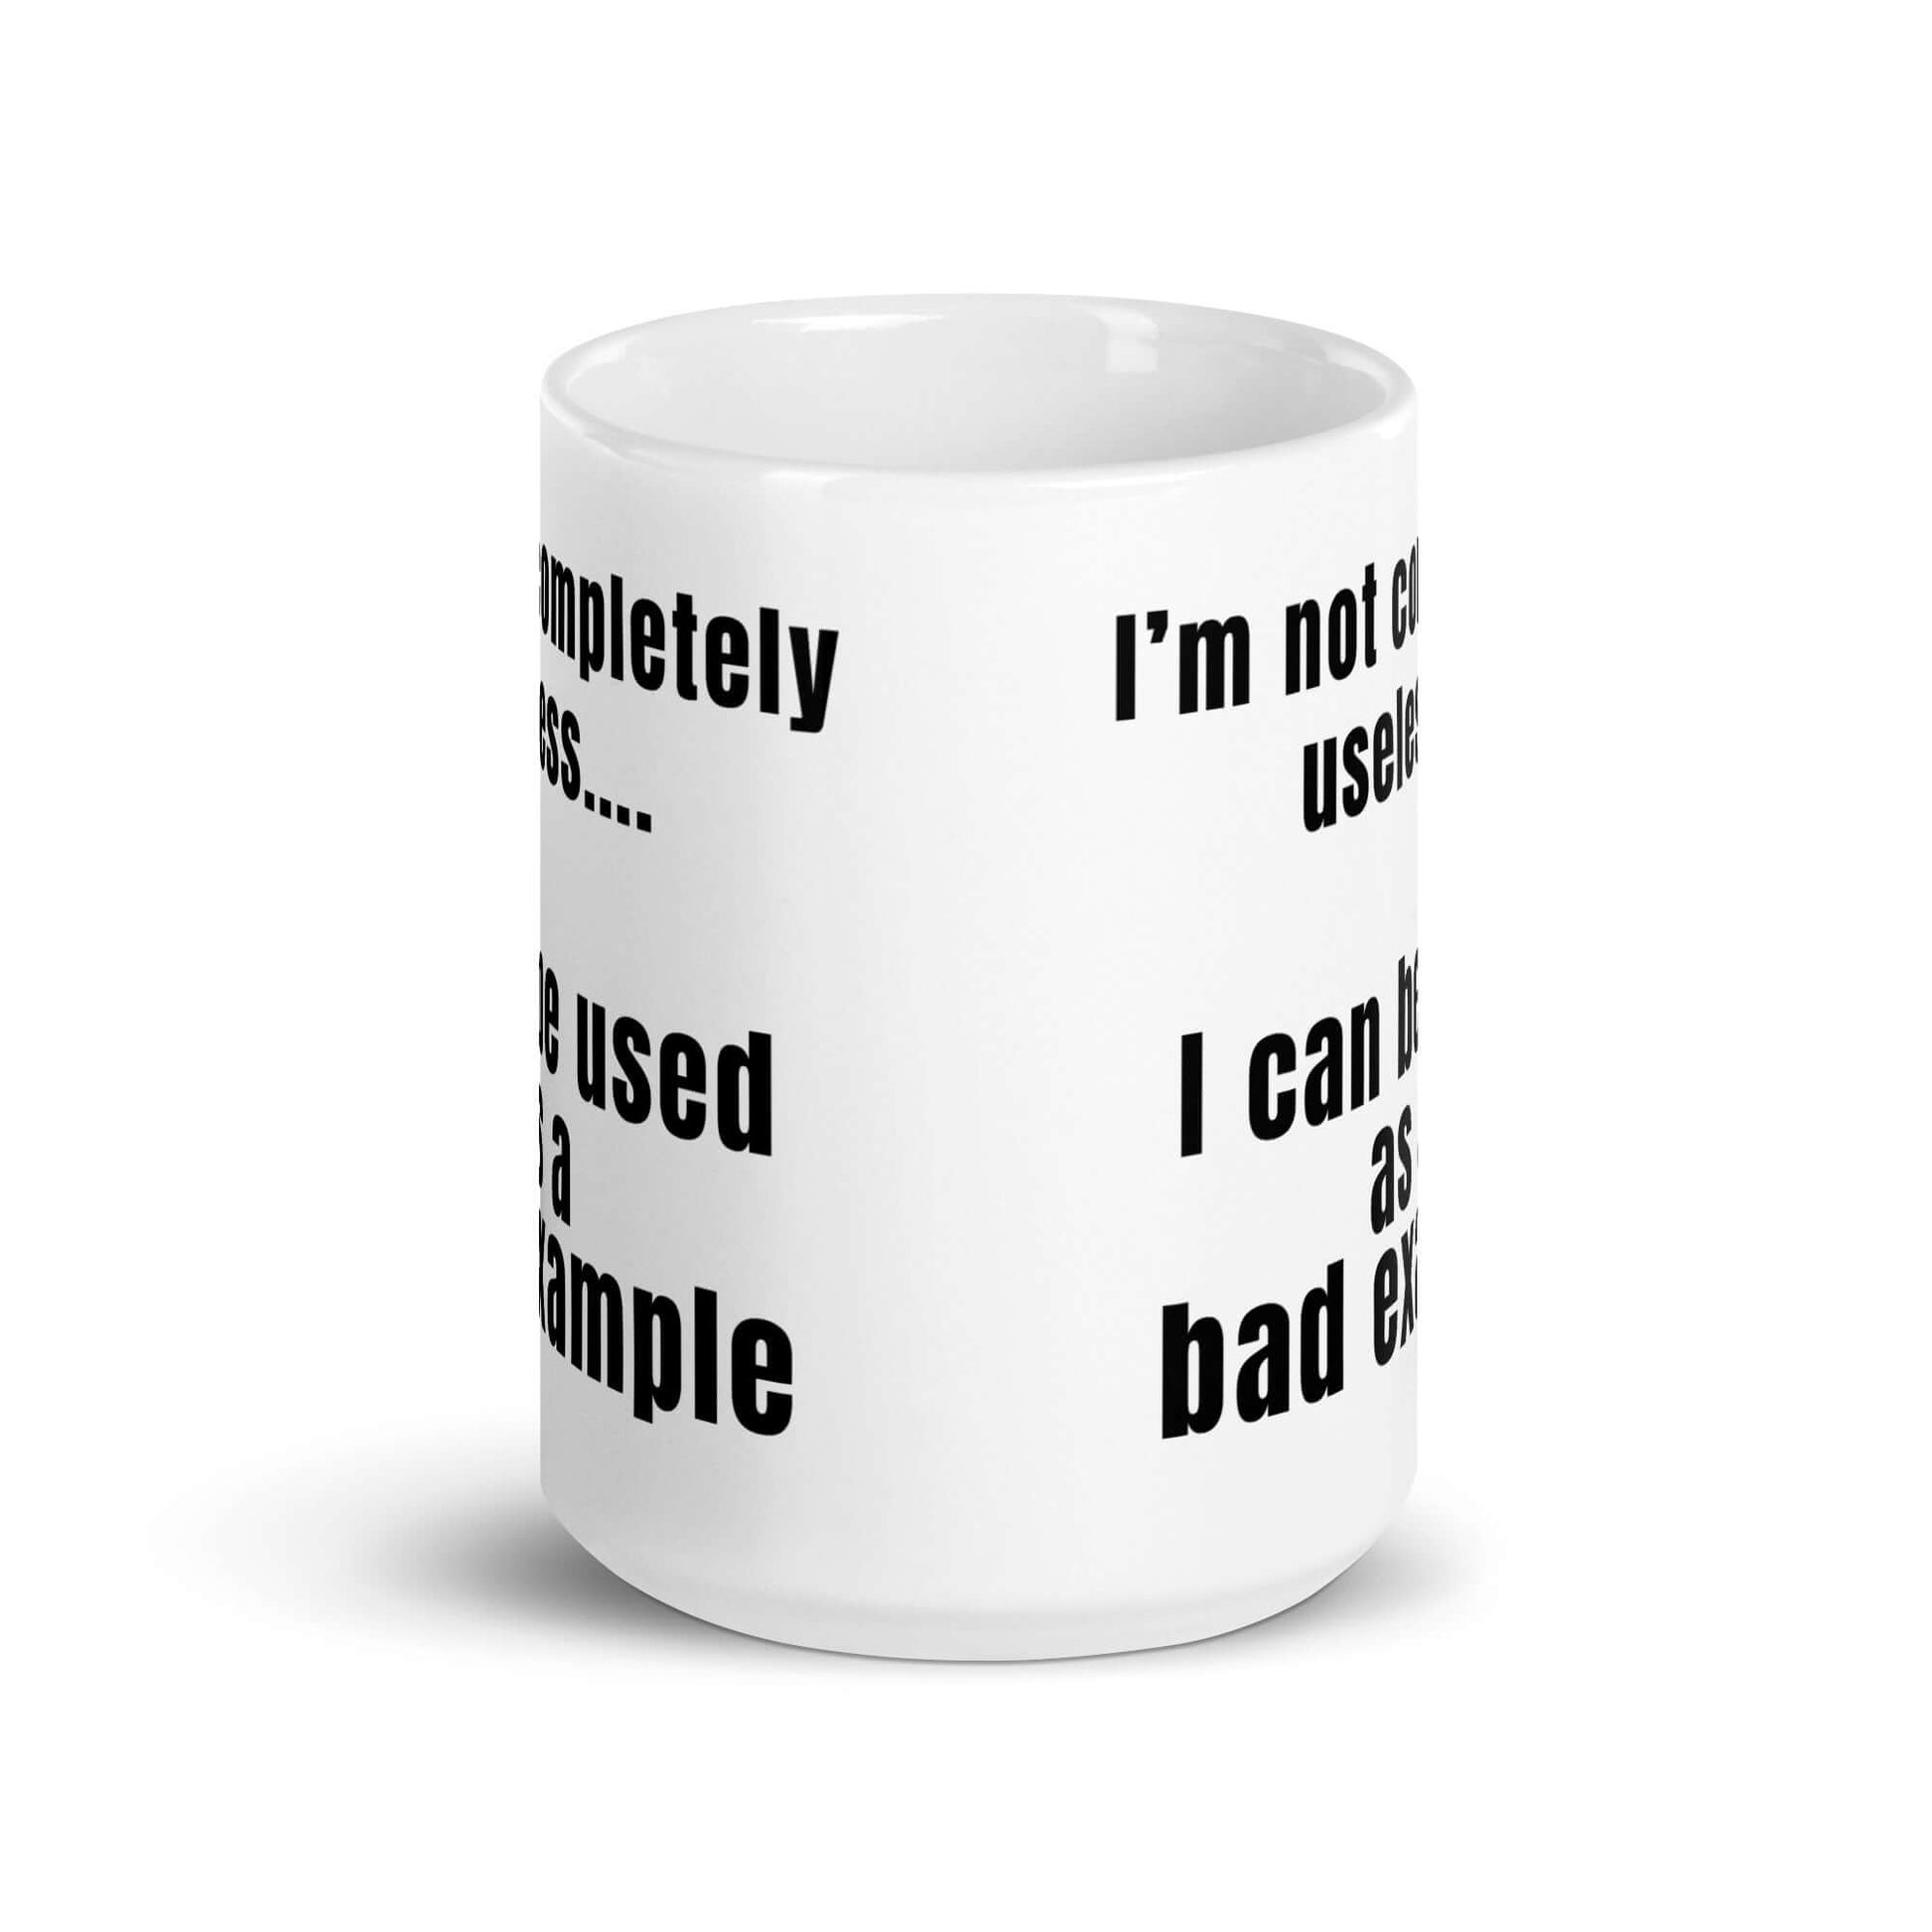 I'm not completely useless.... I can be used as a bad example - White glossy mug - Horrible Designs